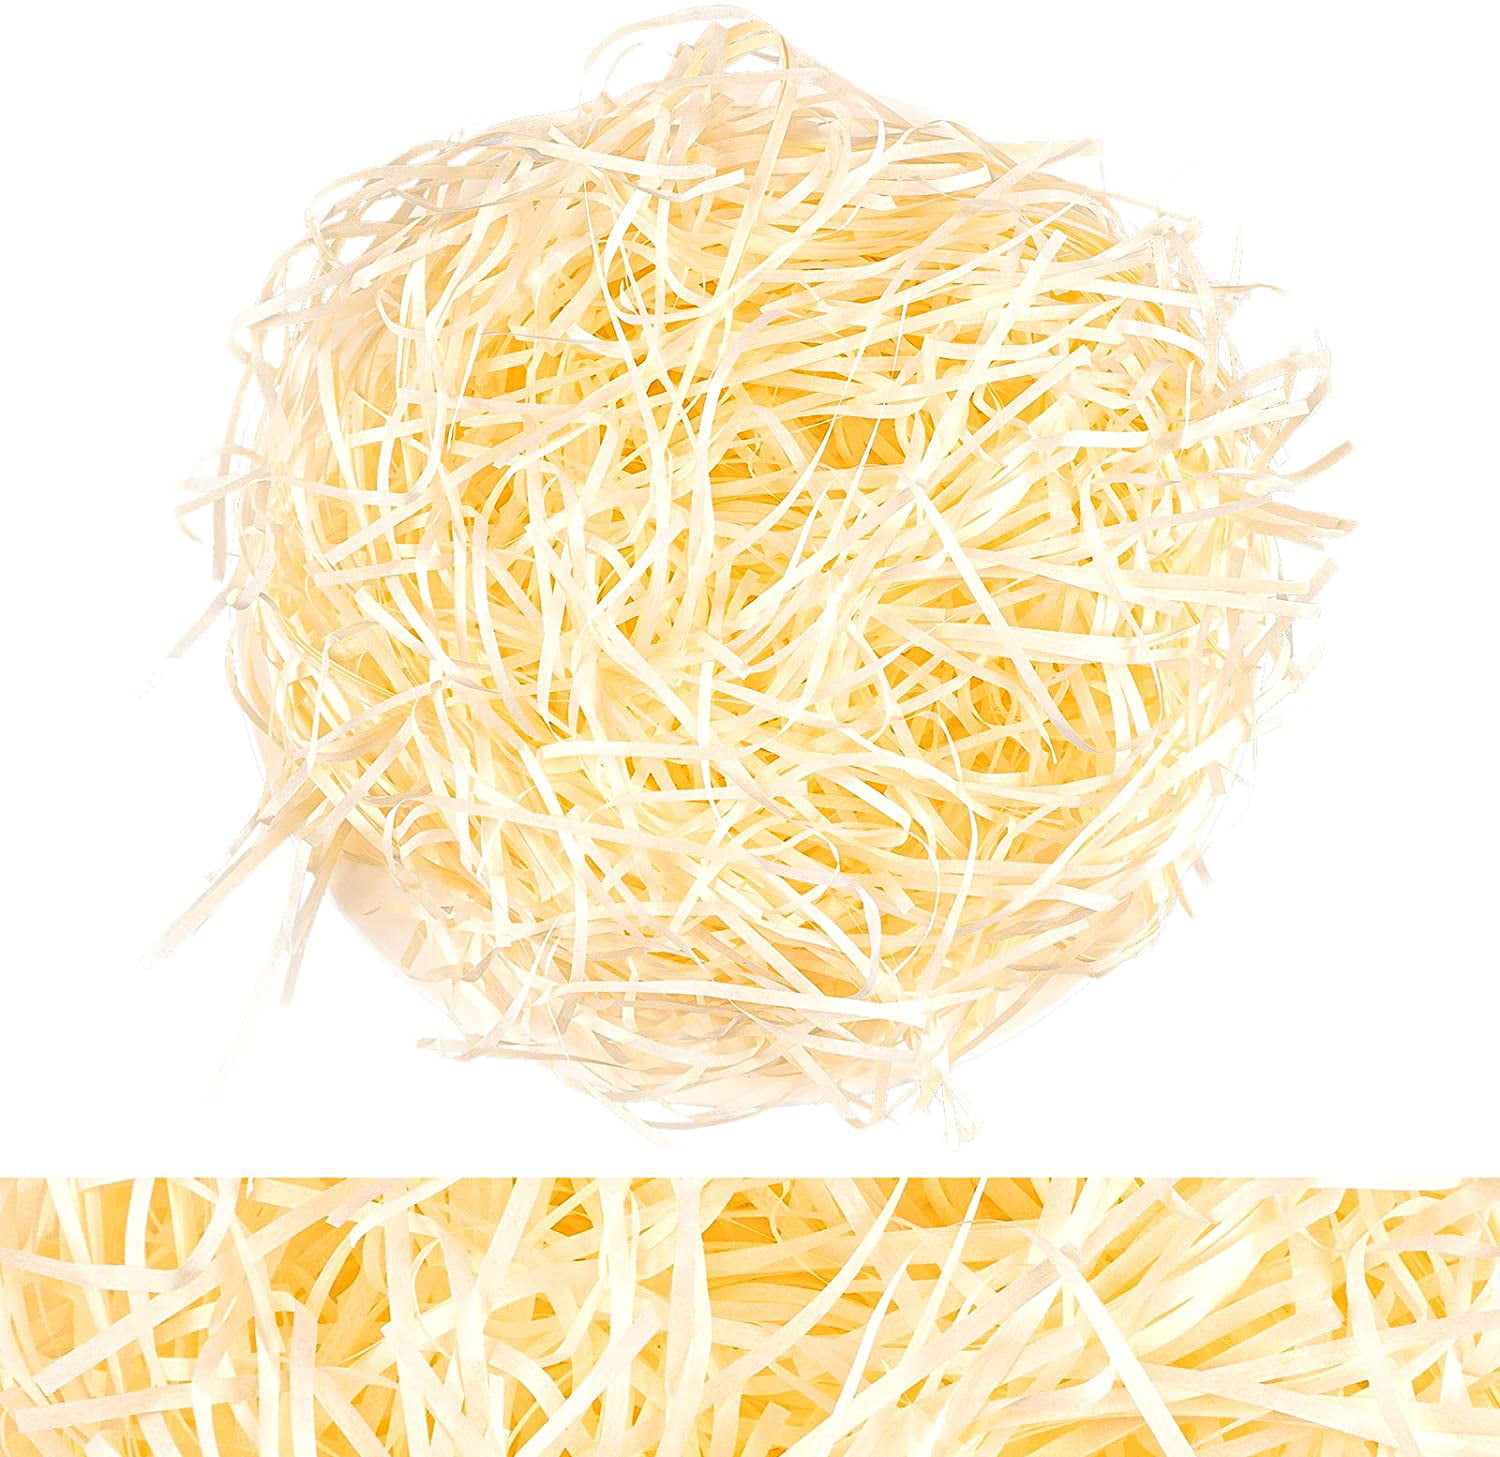 Gift Box Filler Paper Party Supplies Shredded Tissue Paper 200g Raffia Grass for Hampers DIY Packing Accessories Bright Yellow Basket Grass 